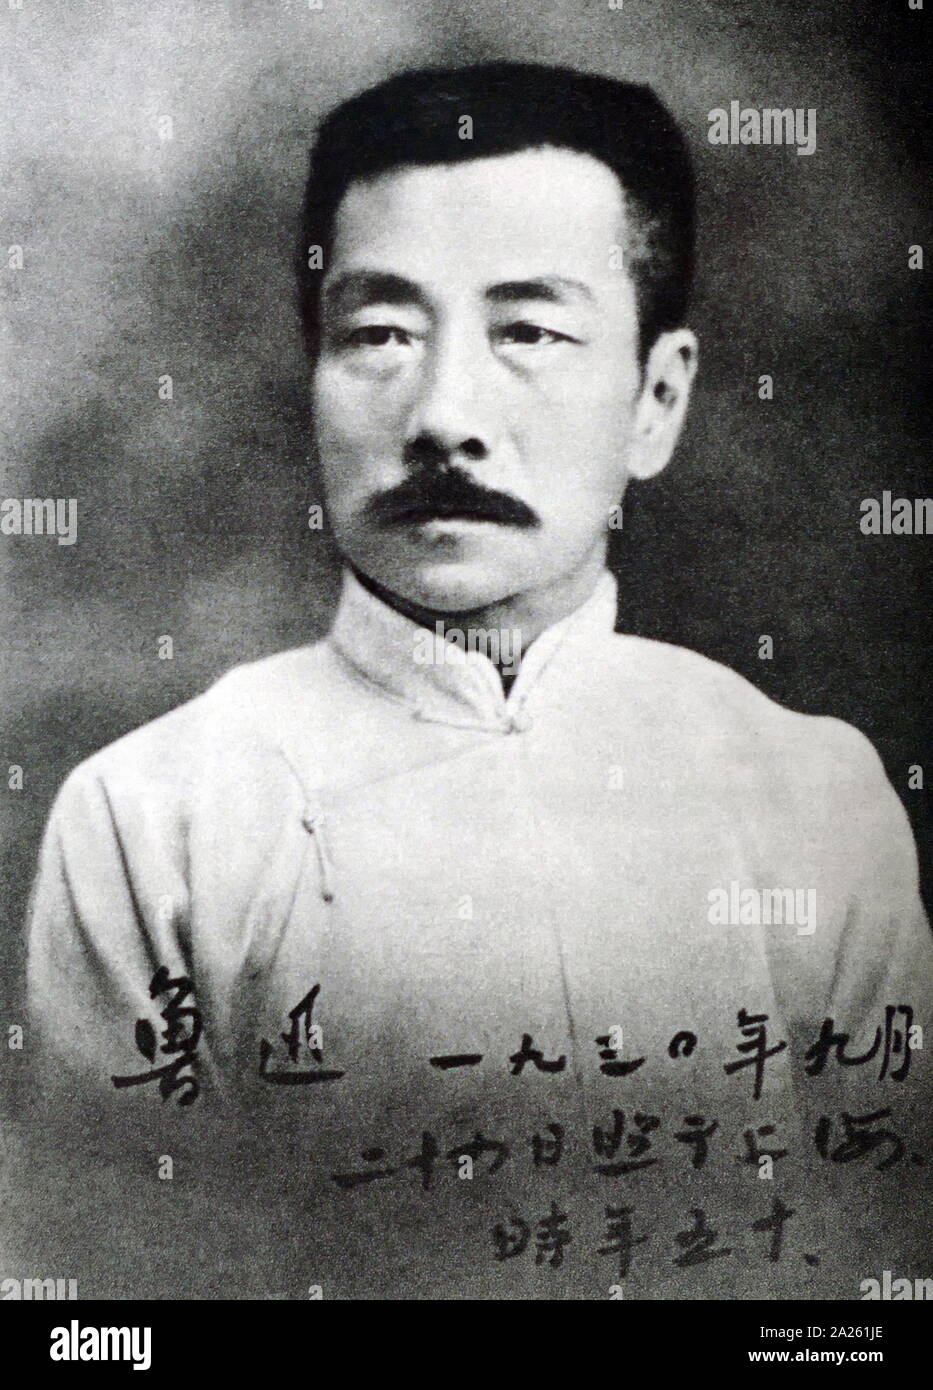 Lu Xun (1881 - 1936), Chinese writer, essayist, poet, and literary critic. He was a leading figure of modern Chinese literature. Writing in Vernacular Chinese and Classical Chinese, he was a short story writer, editor, translator, literary critic, essayist, poet, and designer. In the 1930s, he became the titular head of the League of Left-Wing Writers in Shanghai. Stock Photo